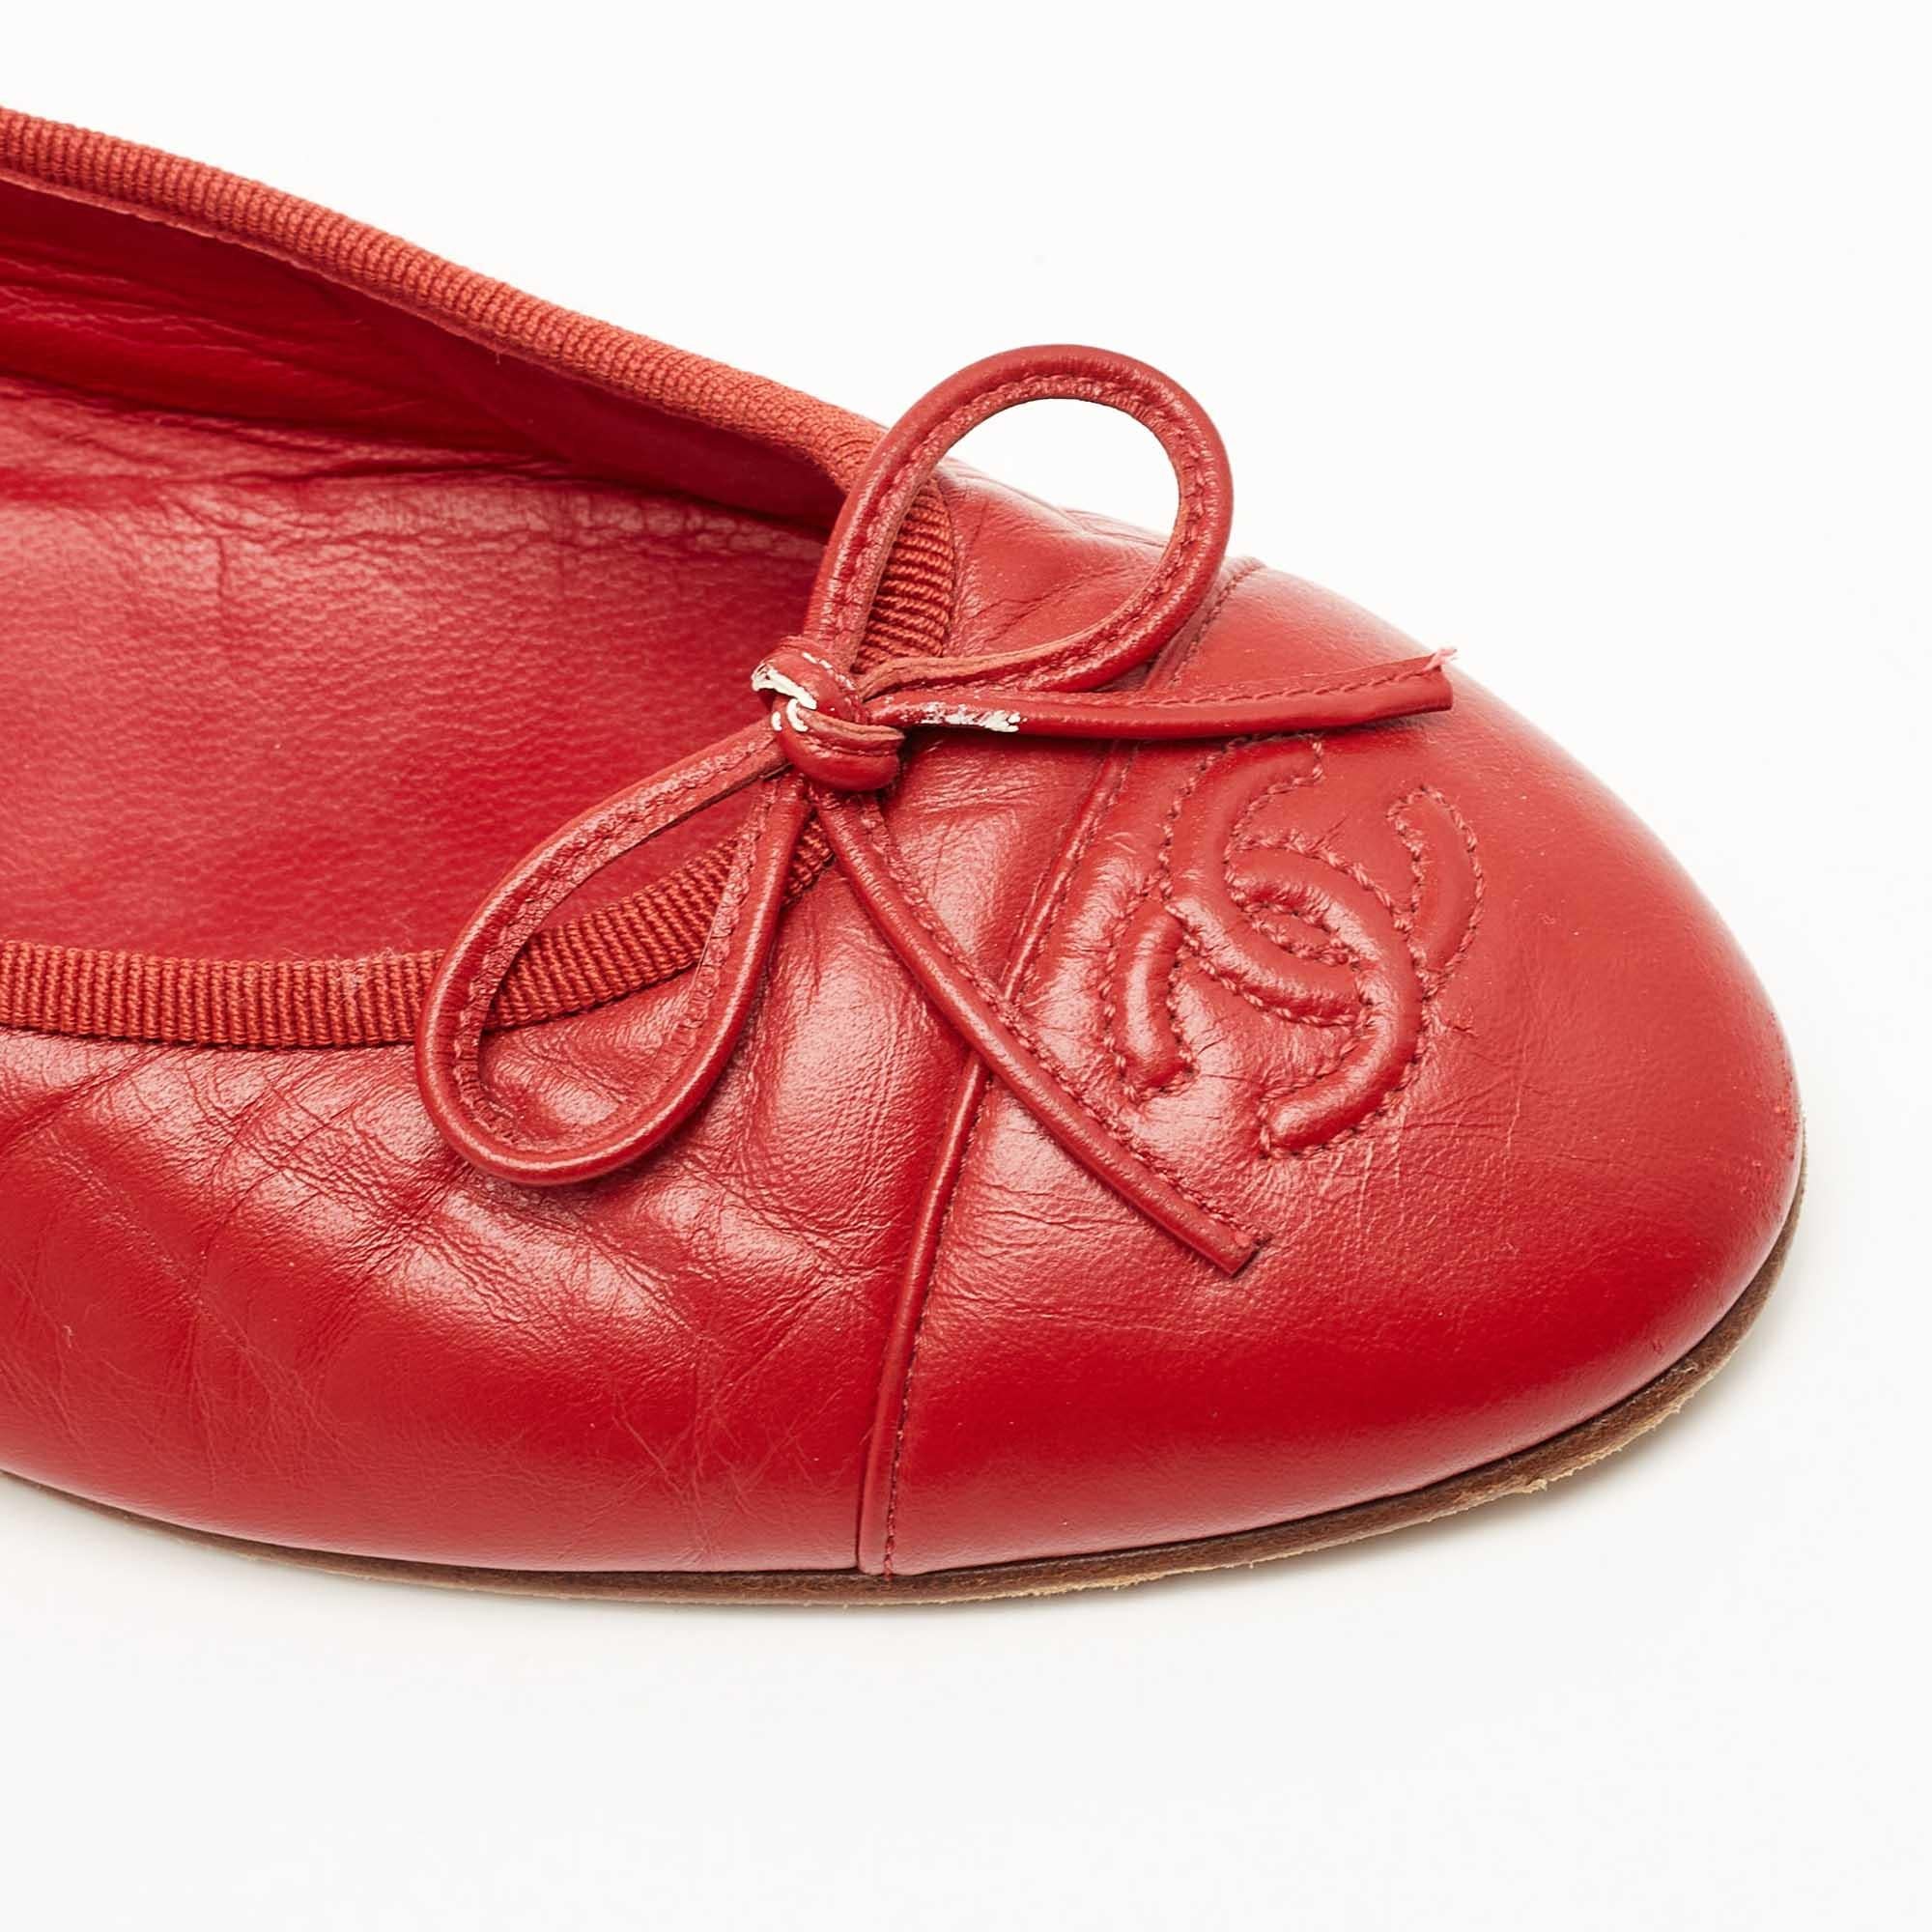 Chanel Red Leather CC Bow Ballet Flats Size 38.5 For Sale 3